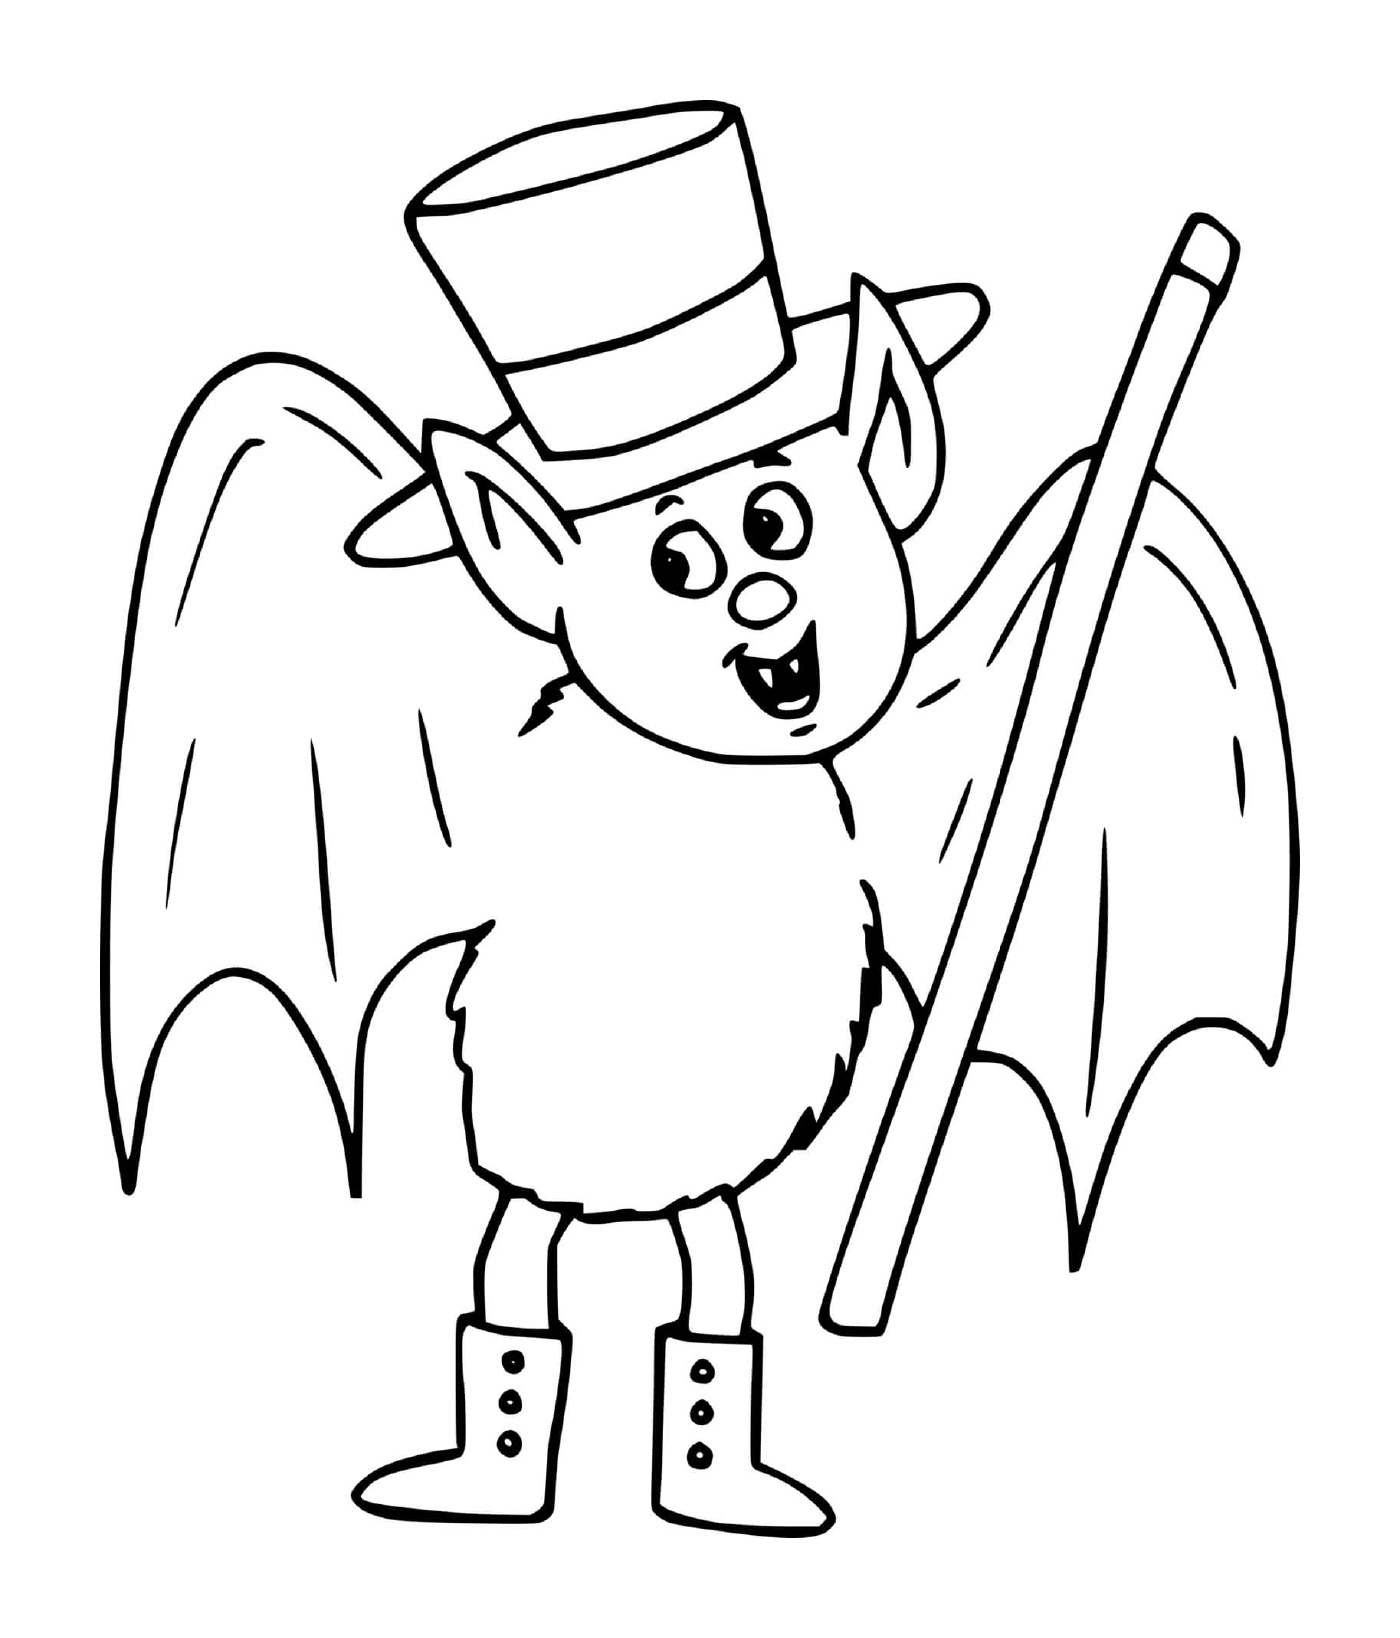  bat with high-shape hat looking like a magician 